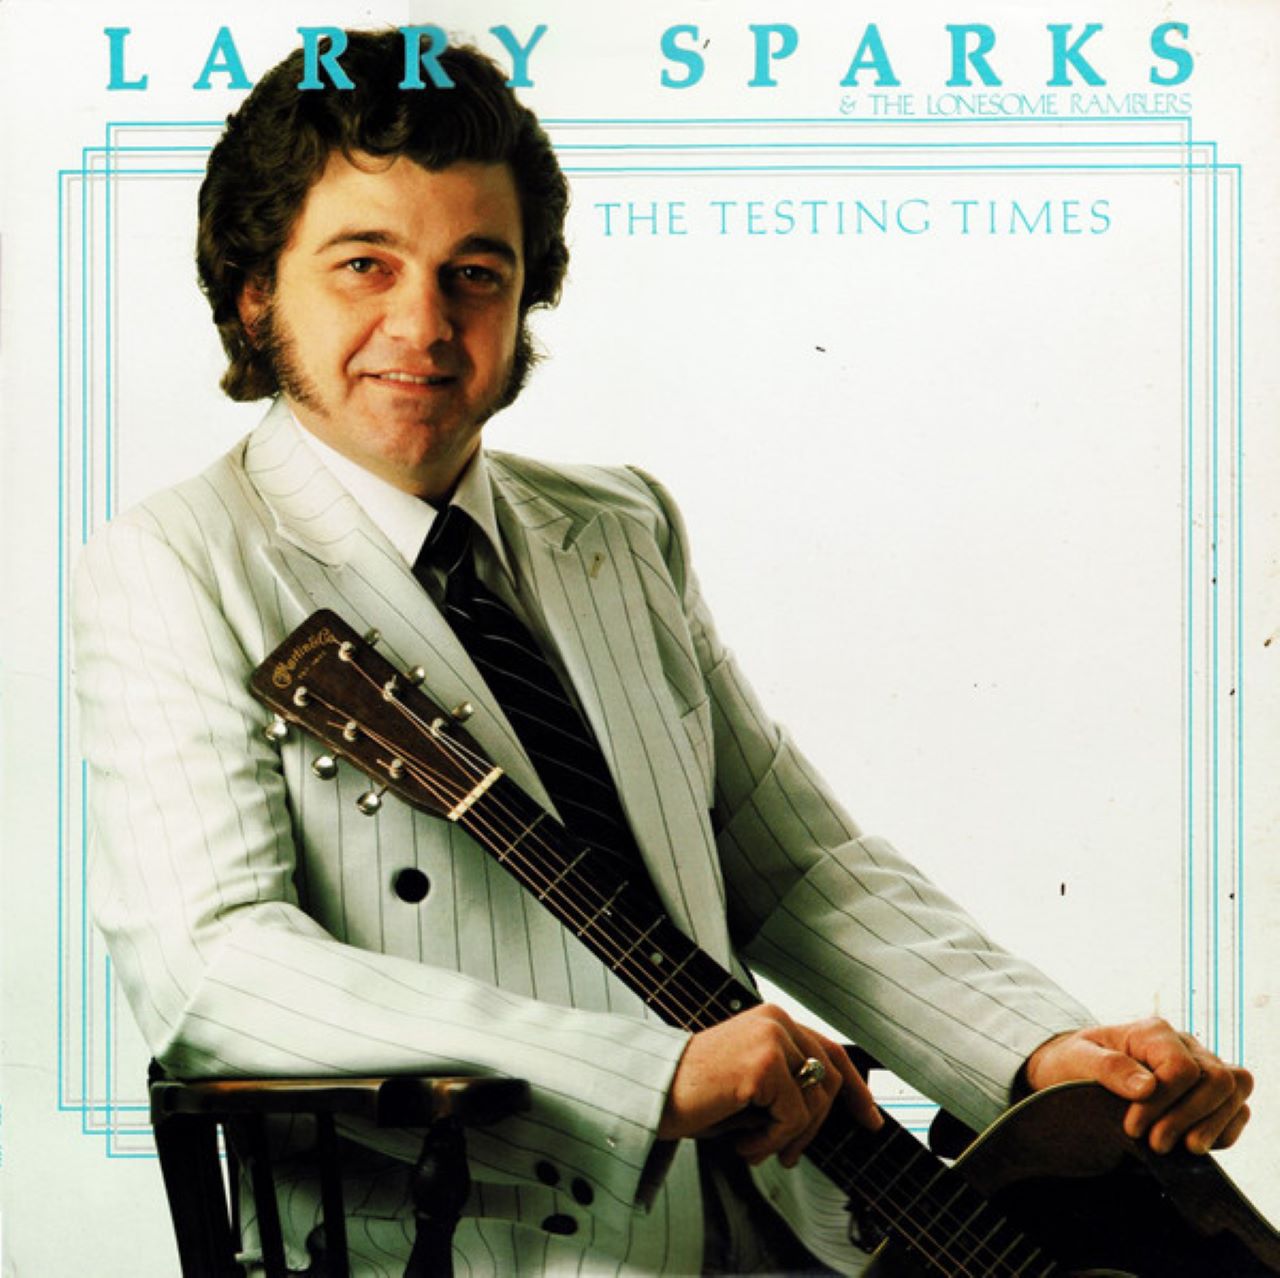 Larry Sparks & The Lonesome Ramblers - The Testing Times cover album